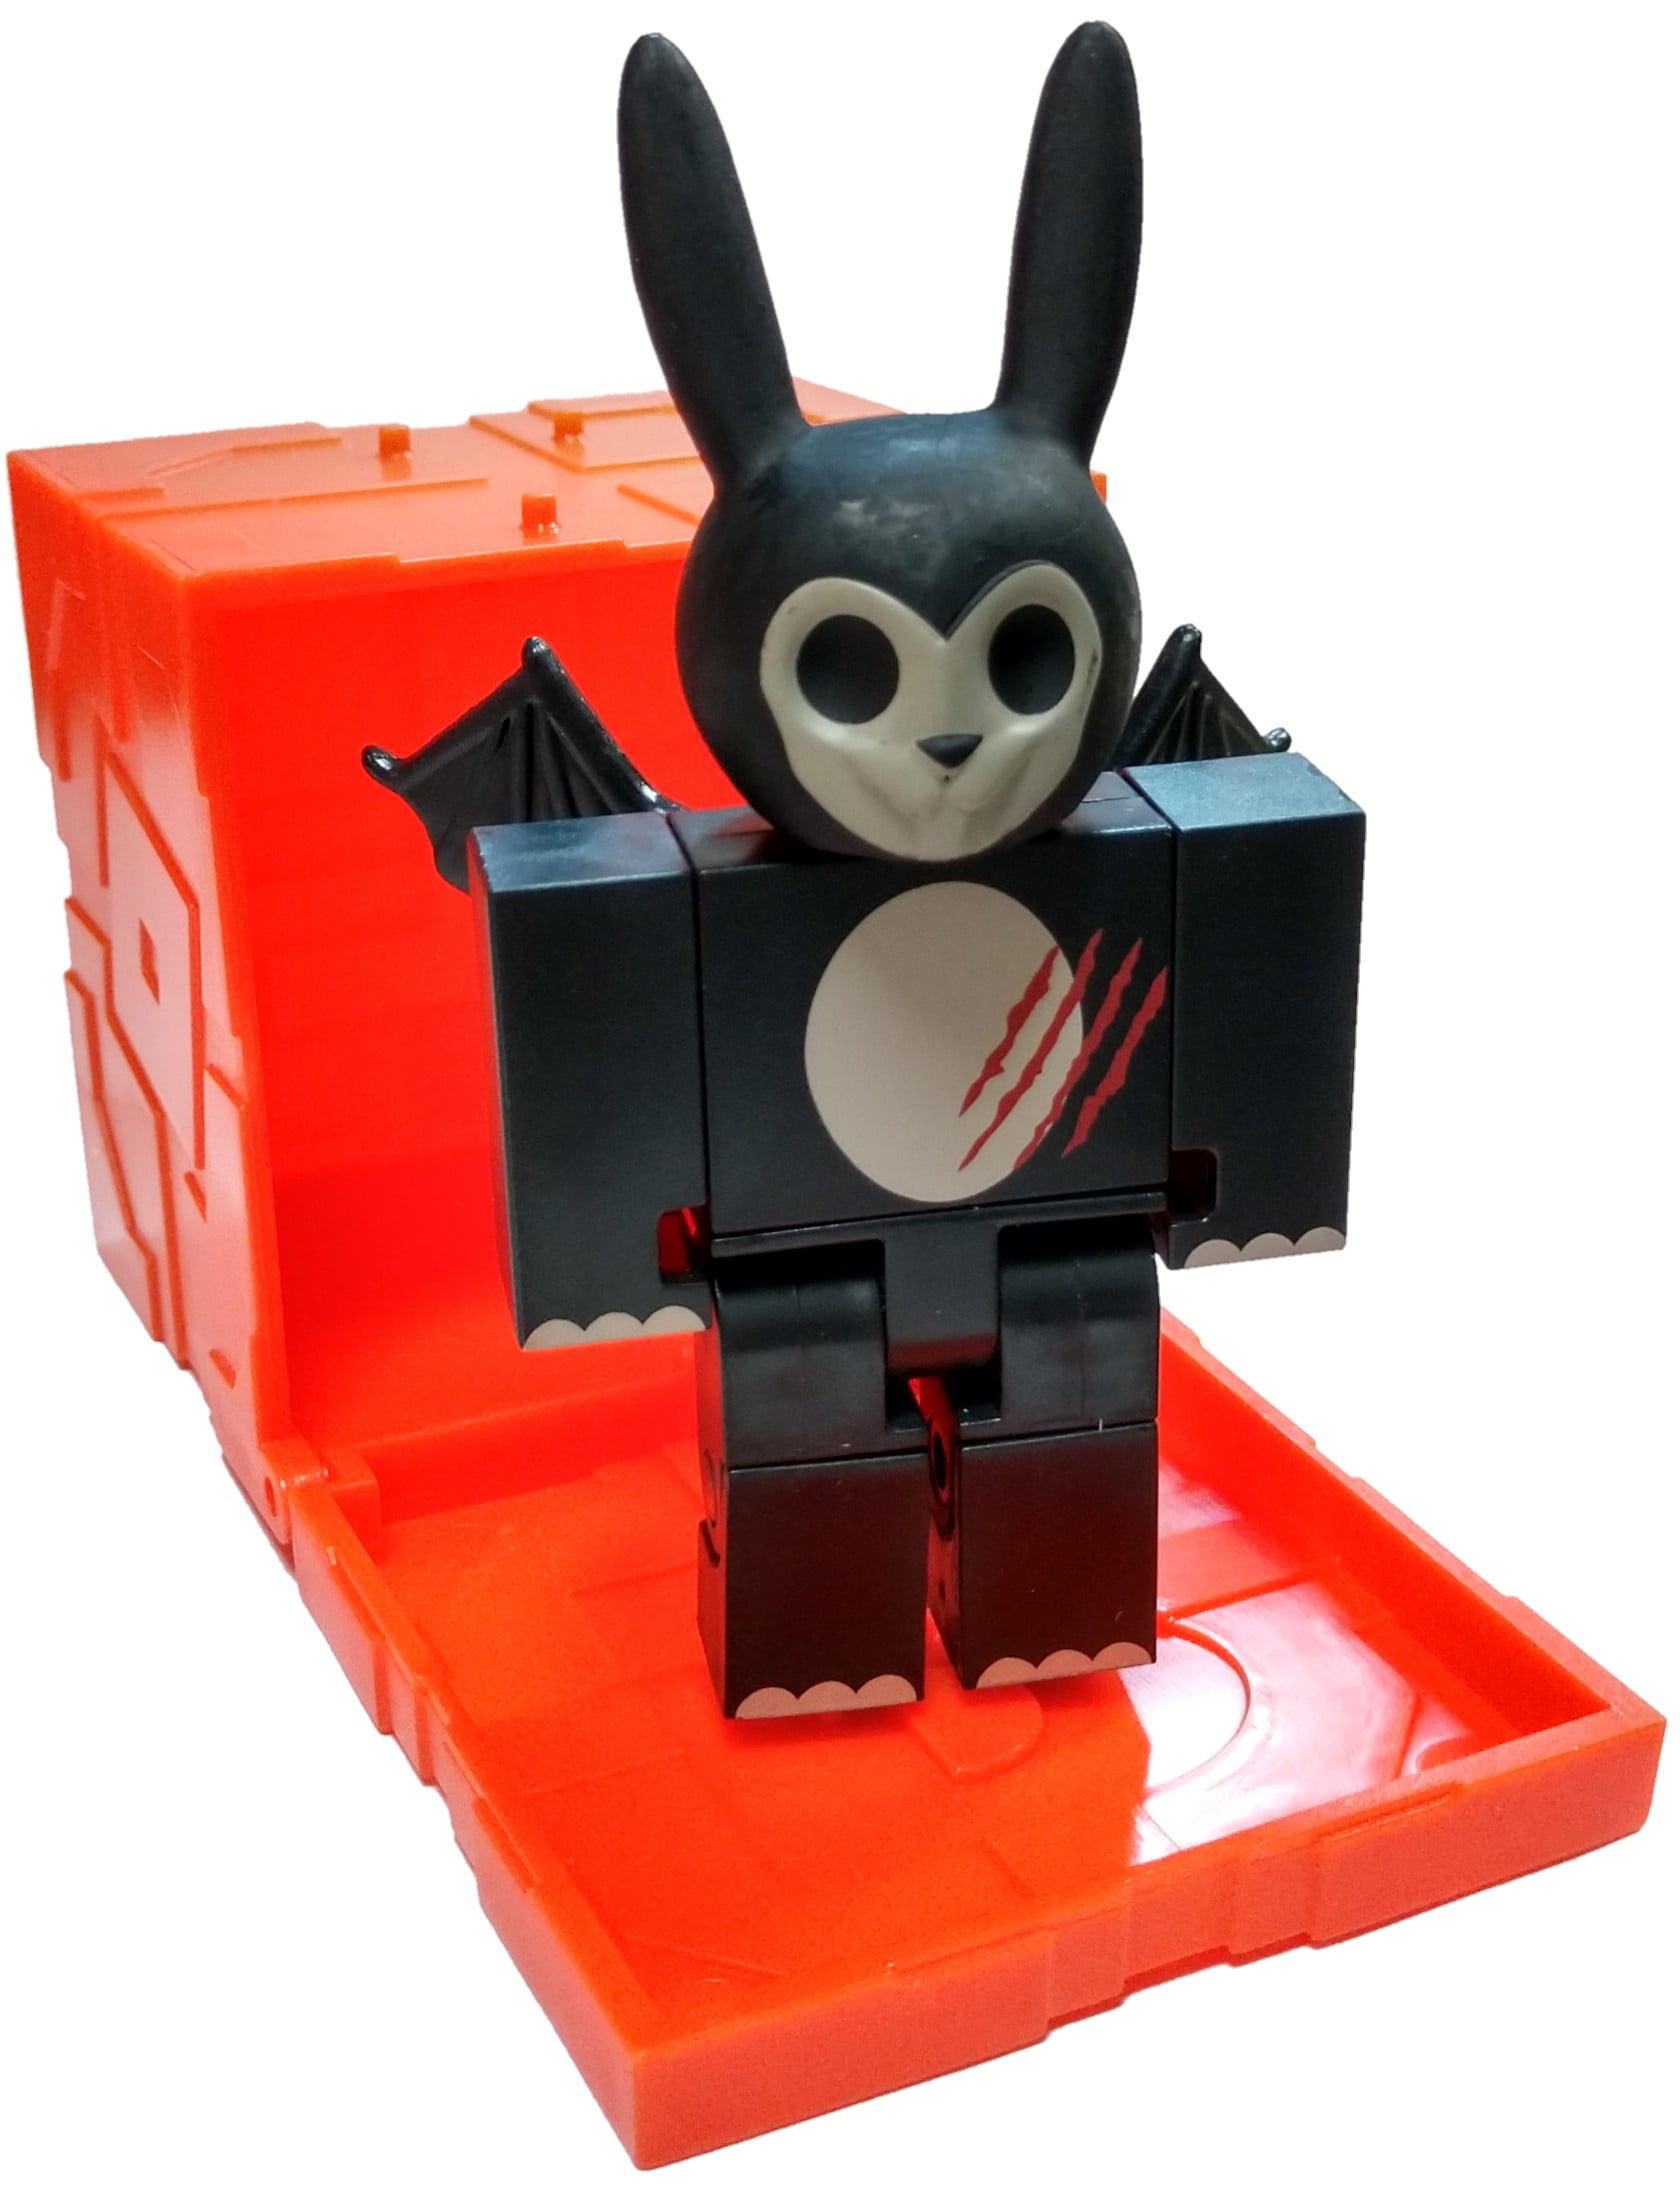 Roblox Series 6 Hunted Zombie Bunny Mini Figure With Orange Cube And Online Code No Packaging Walmart Com Walmart Com